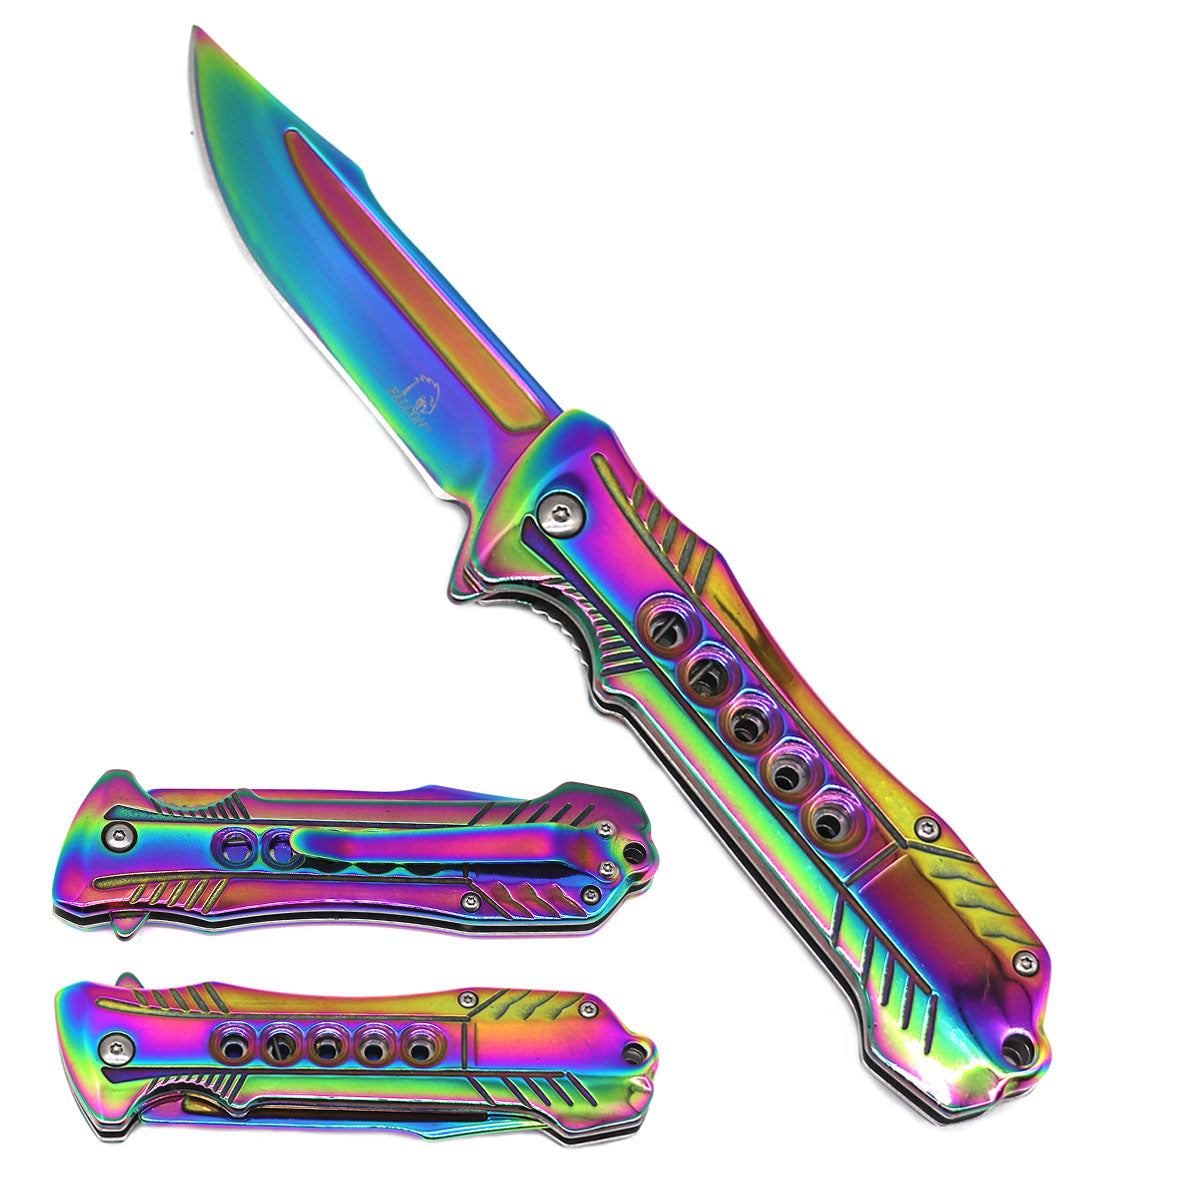 Falcon 7.75" Overall Semi-Automatic Rainbow Spring Assisted Knife